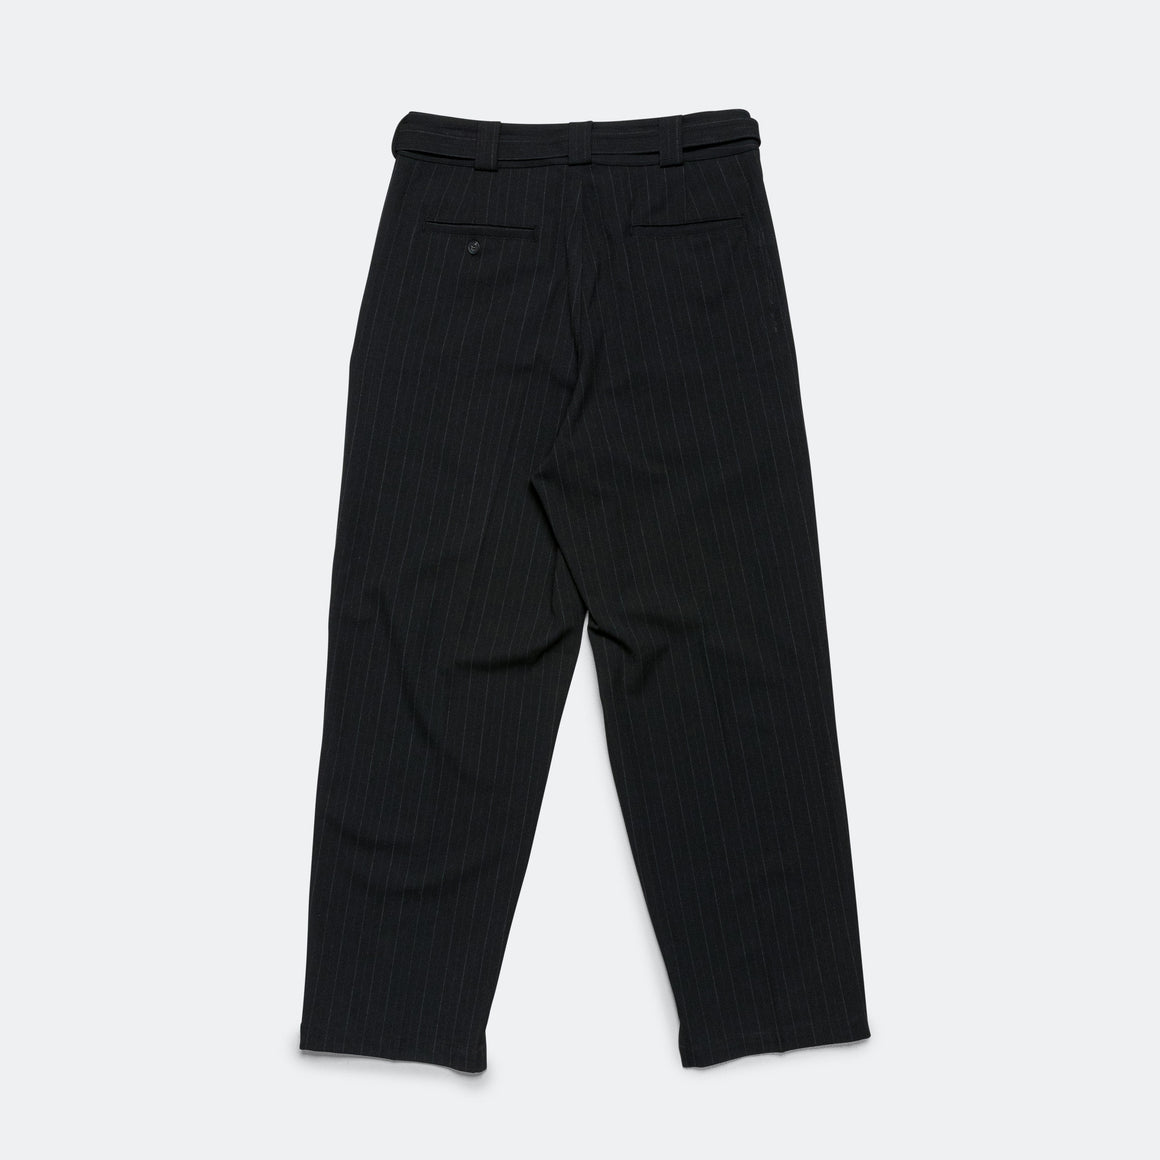 Beach Brains - Pleated Suit Pant - Black Pinstripe - UP THERE